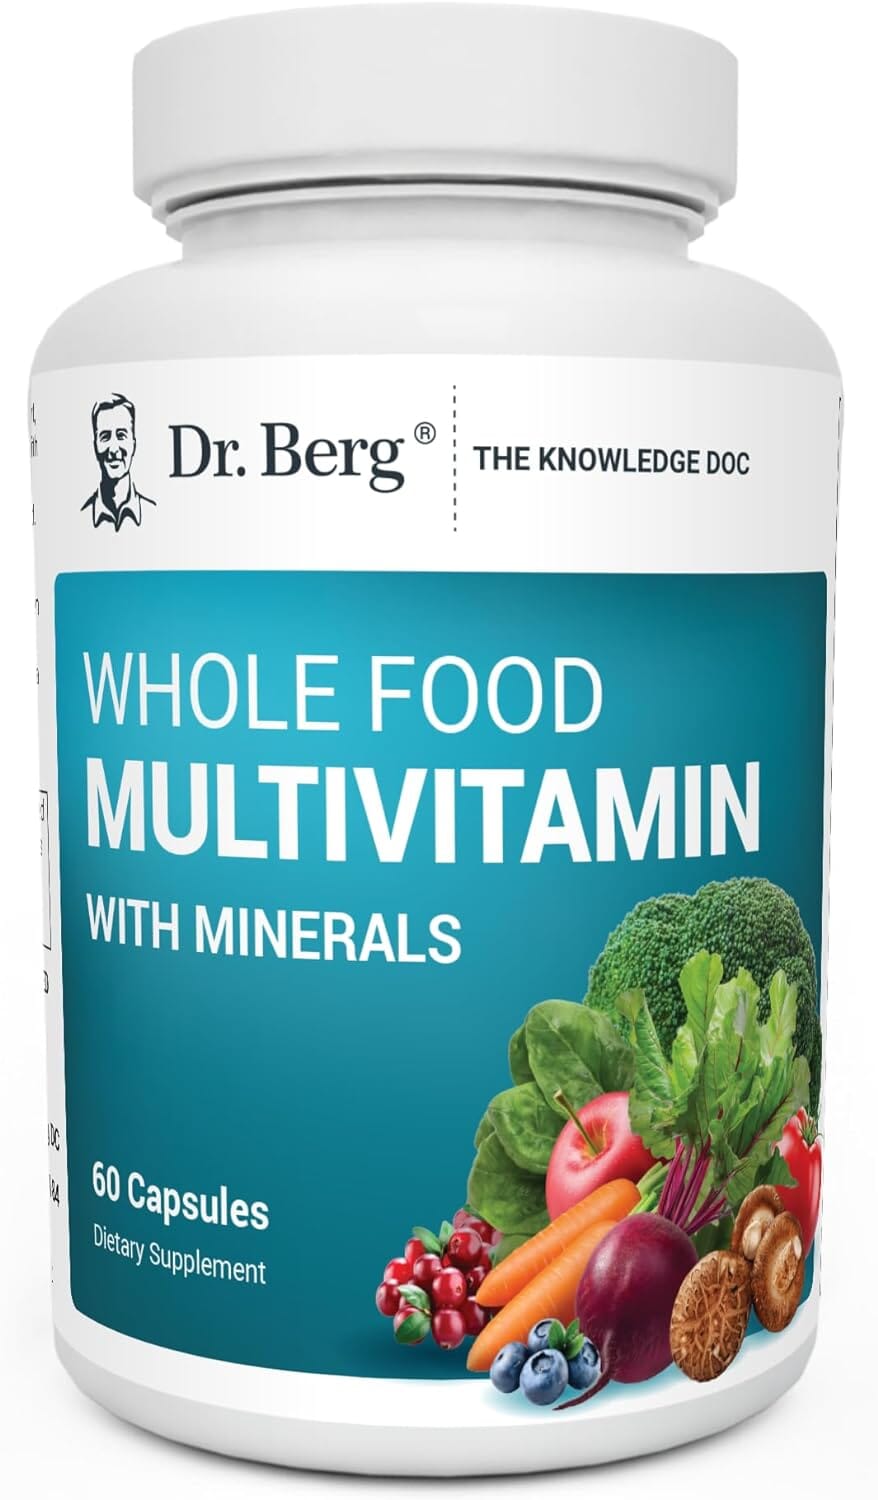 Dr. Berg Whole Food Multivitamin with Minerals - Daily Multivitamin for Men and Women - Includes Premium Whole Food Fruits and Vegetable Blend with Folate, Alpha-lipoic Acid and More - 60 Capsules